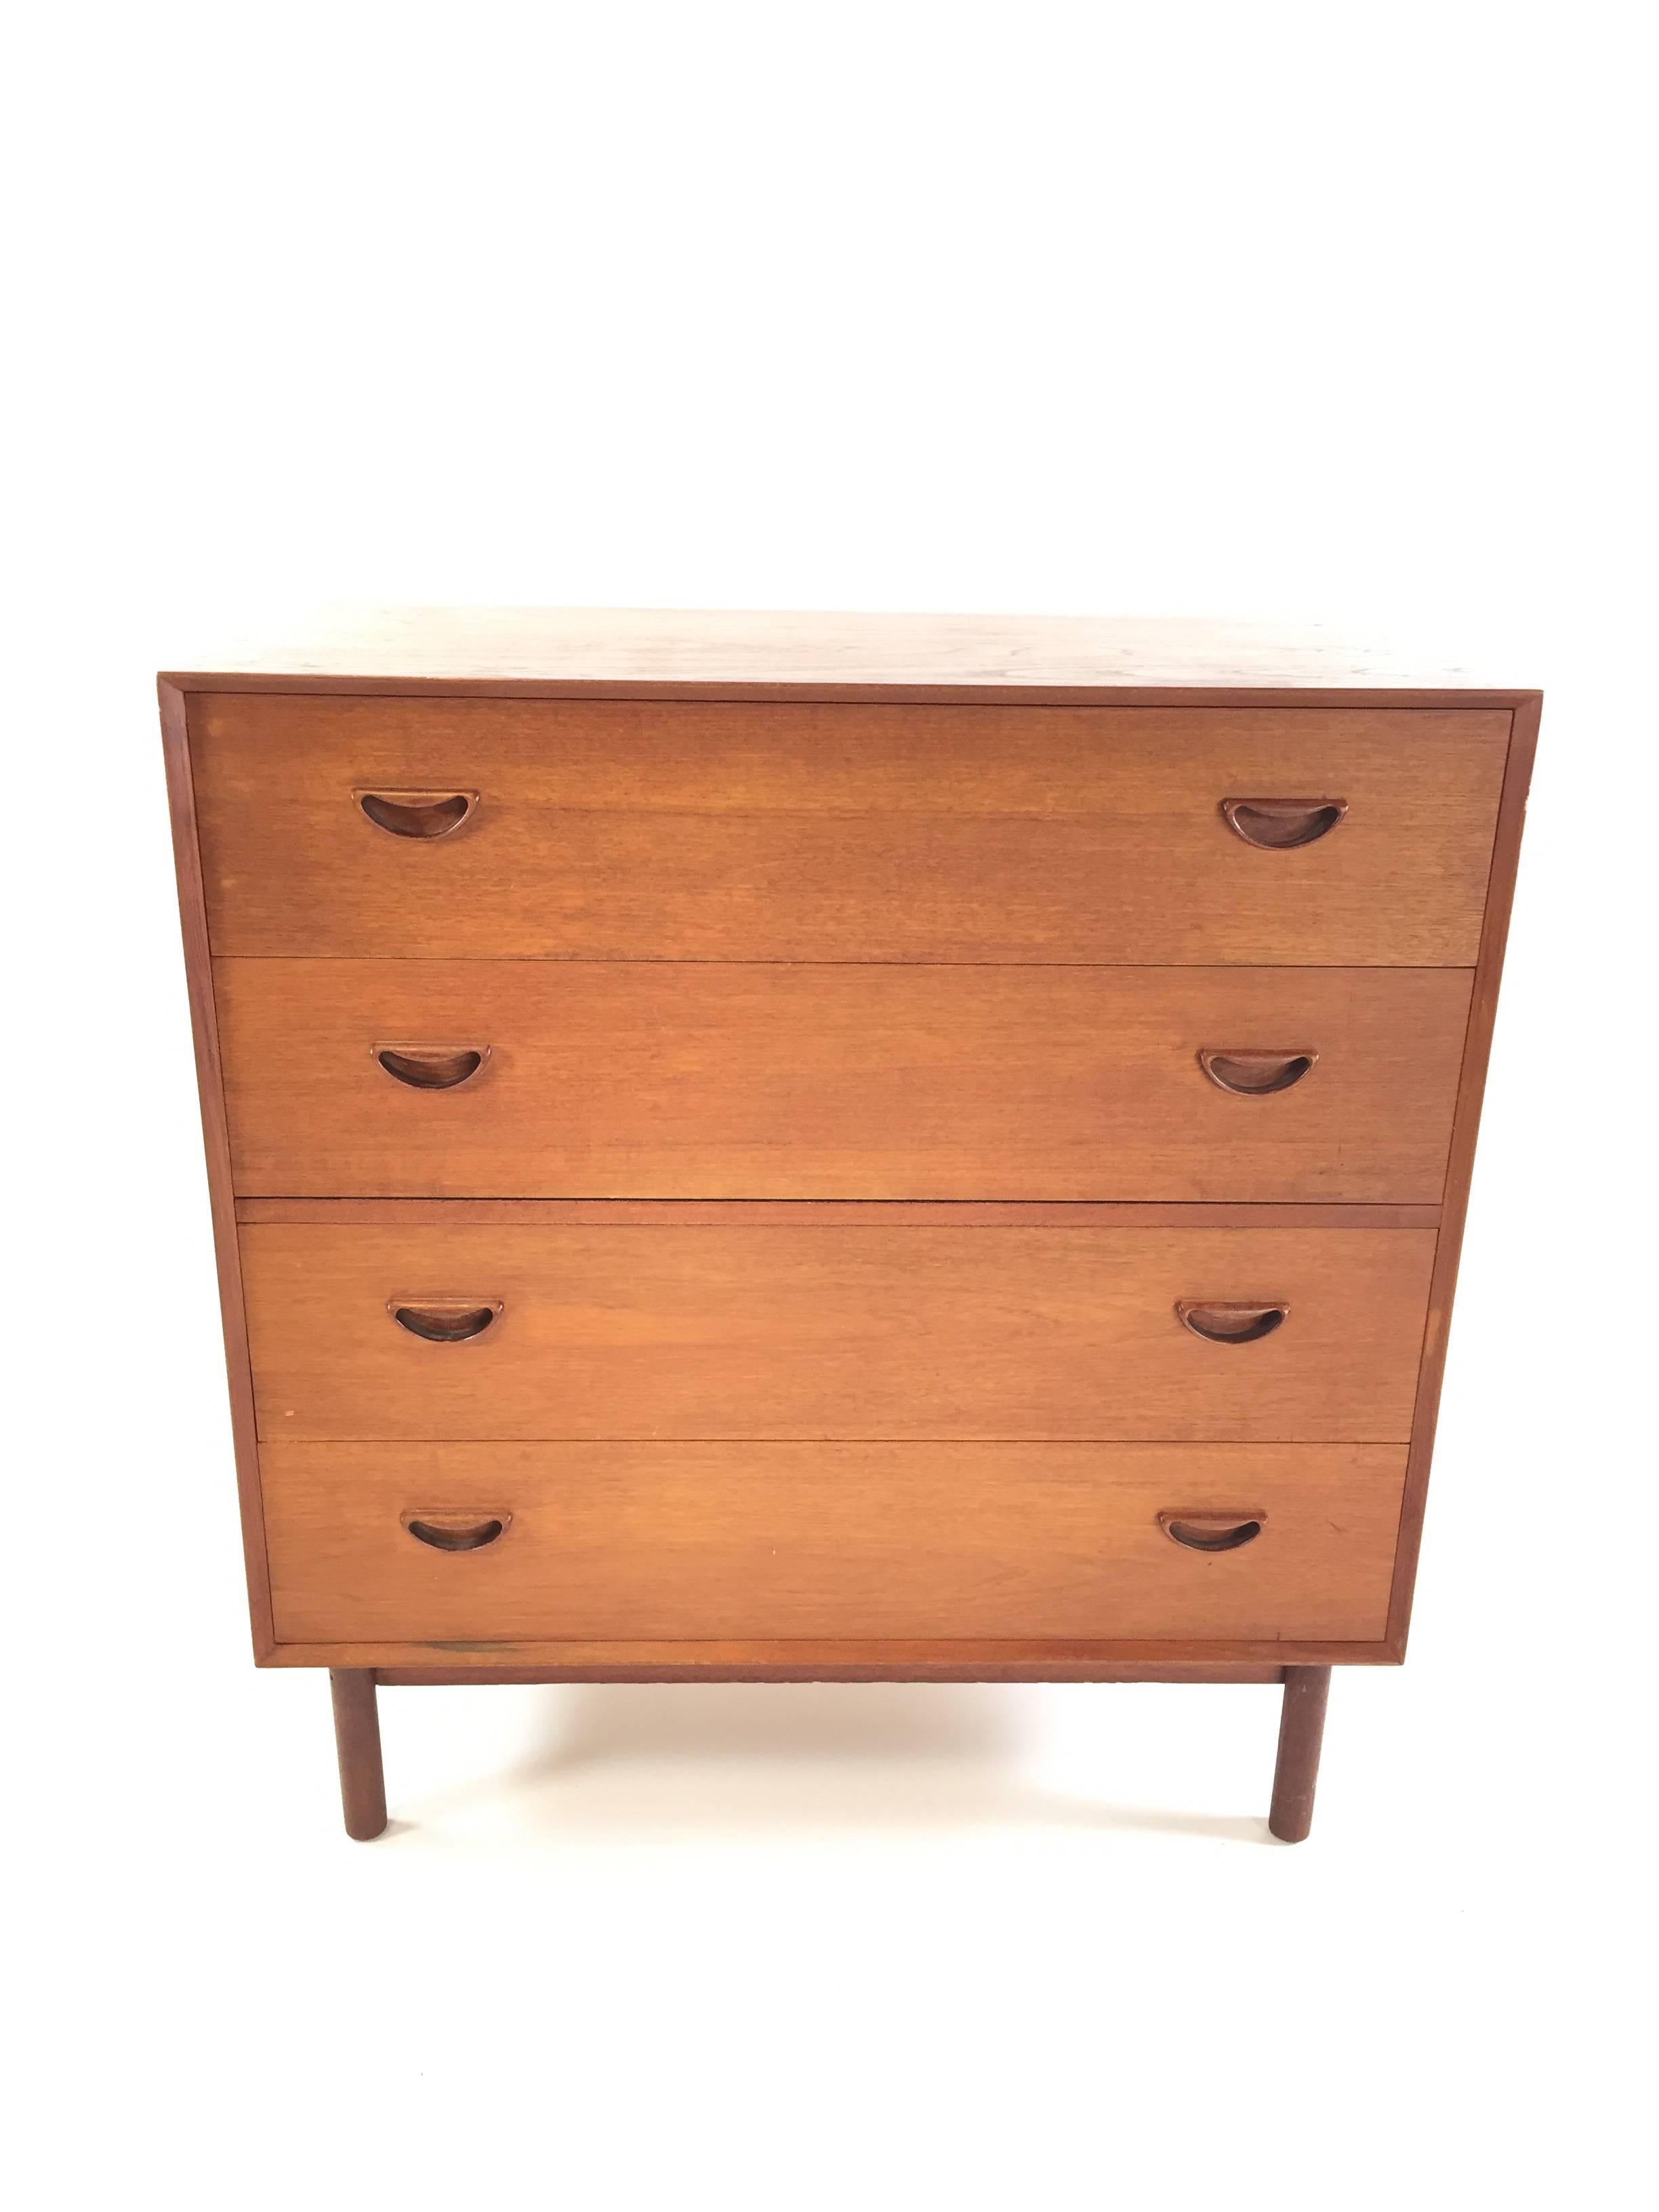 Very nice Peter Hvidt and Orla Mølgaard-Nielsen for John Stuart secretary dresser or vanity. Solid teak with signature dovetail edge joinery. Excellent condition overall with minor wear throughout consistent with age. Superficial but visible tarnish